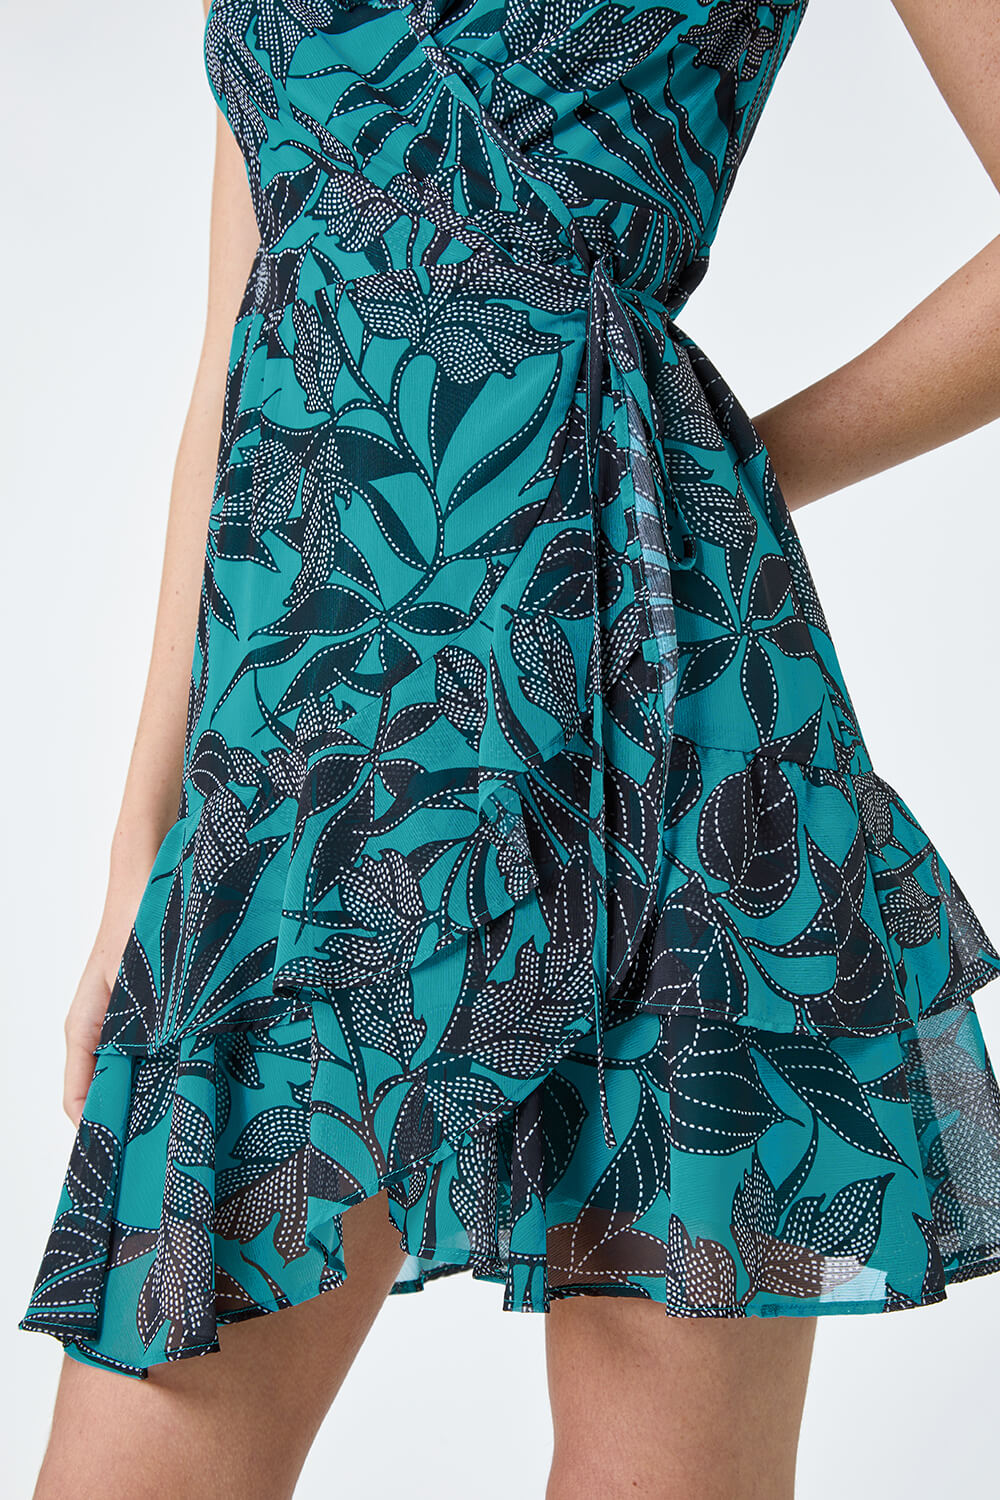 Turquoise Leaf Print Frill Wrap Dress, Image 5 of 5